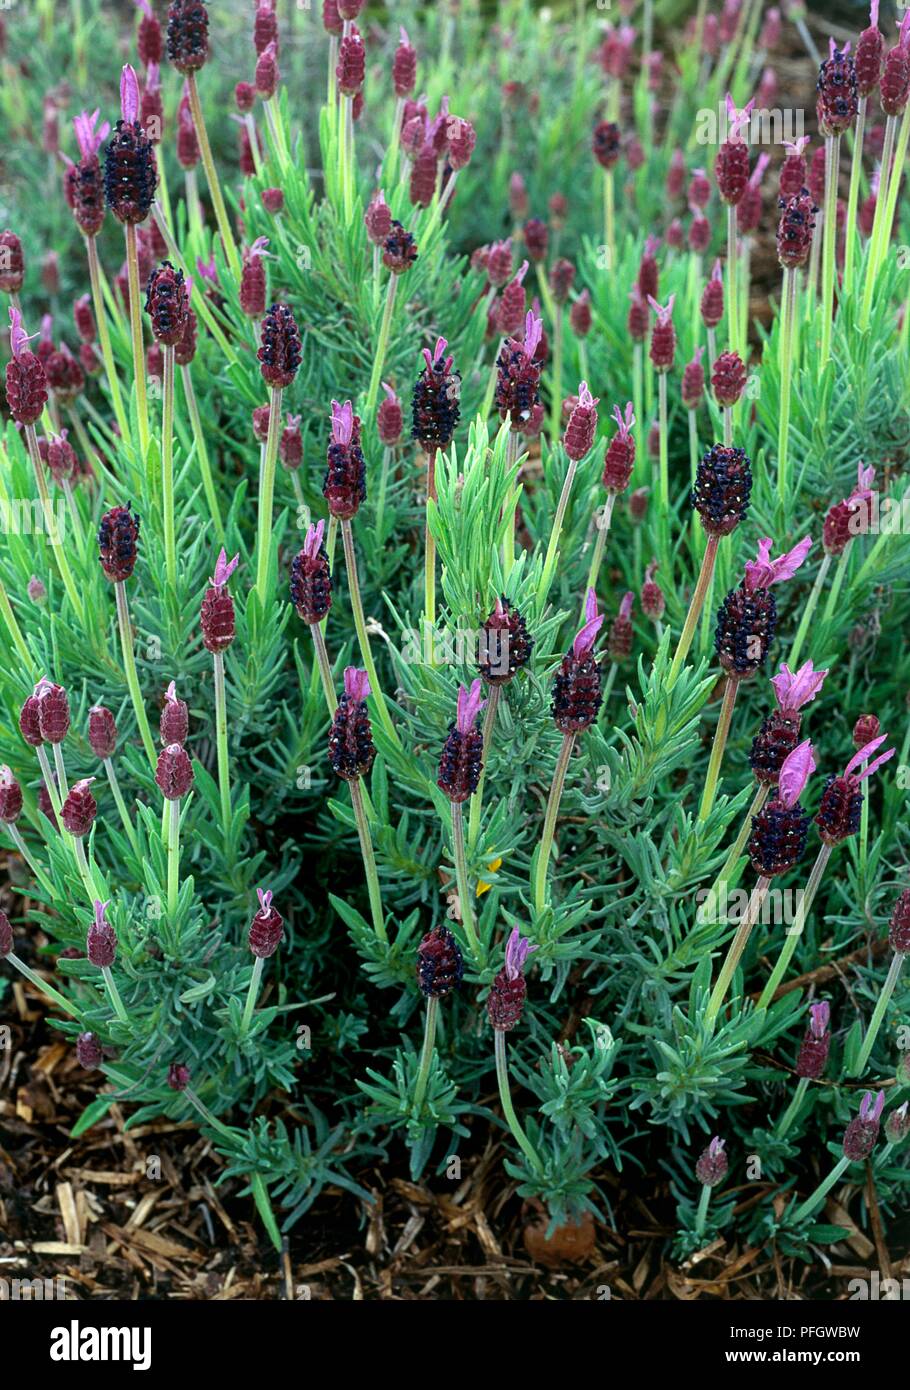 Leaves and flowers from Lavandula stoechas subsp pedunculata (French Lavender) Stock Photo